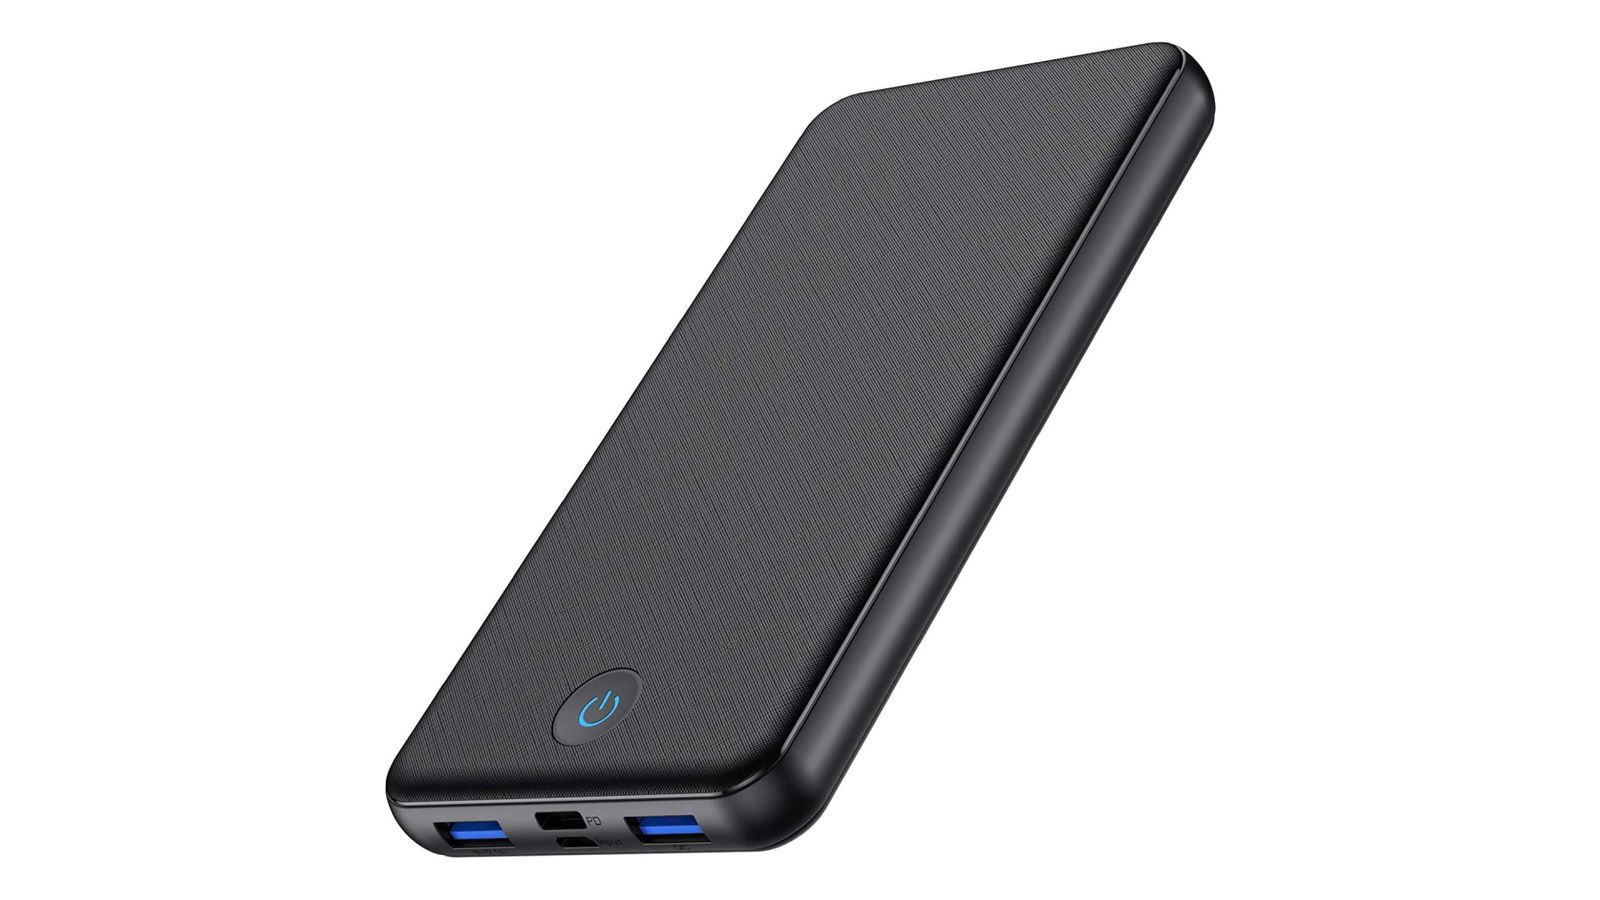 HETP Fast-Charging Power Bank product image of a thin, black, rectangular power bank.